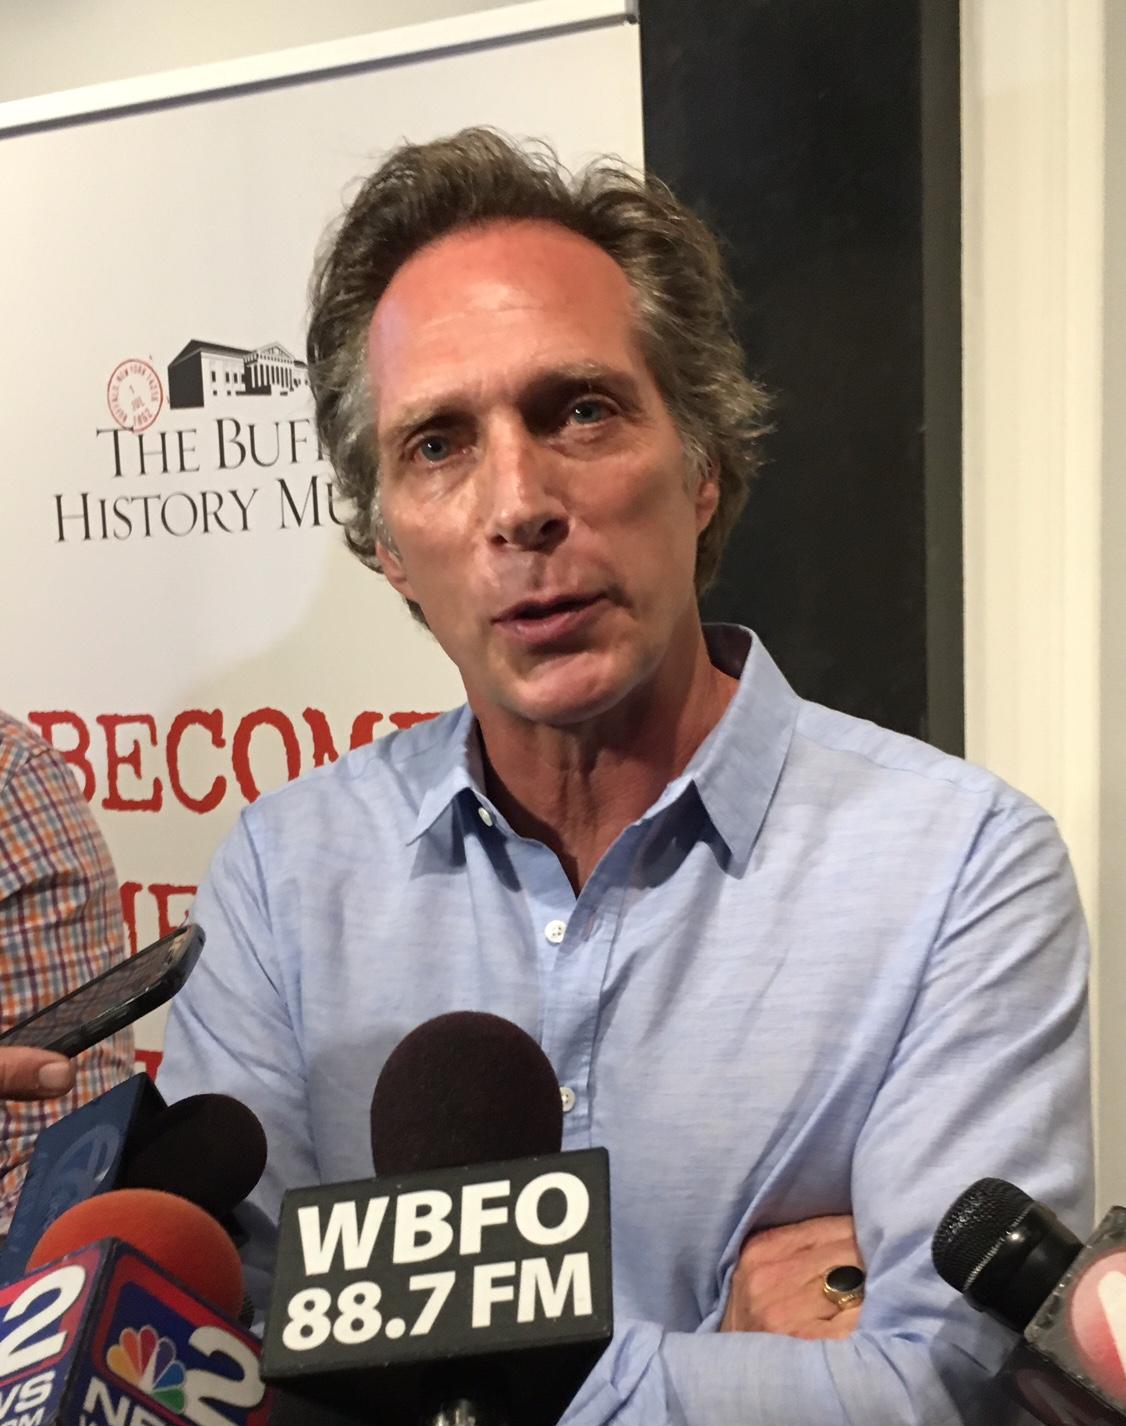 Is william fichtner paralyzed in real life